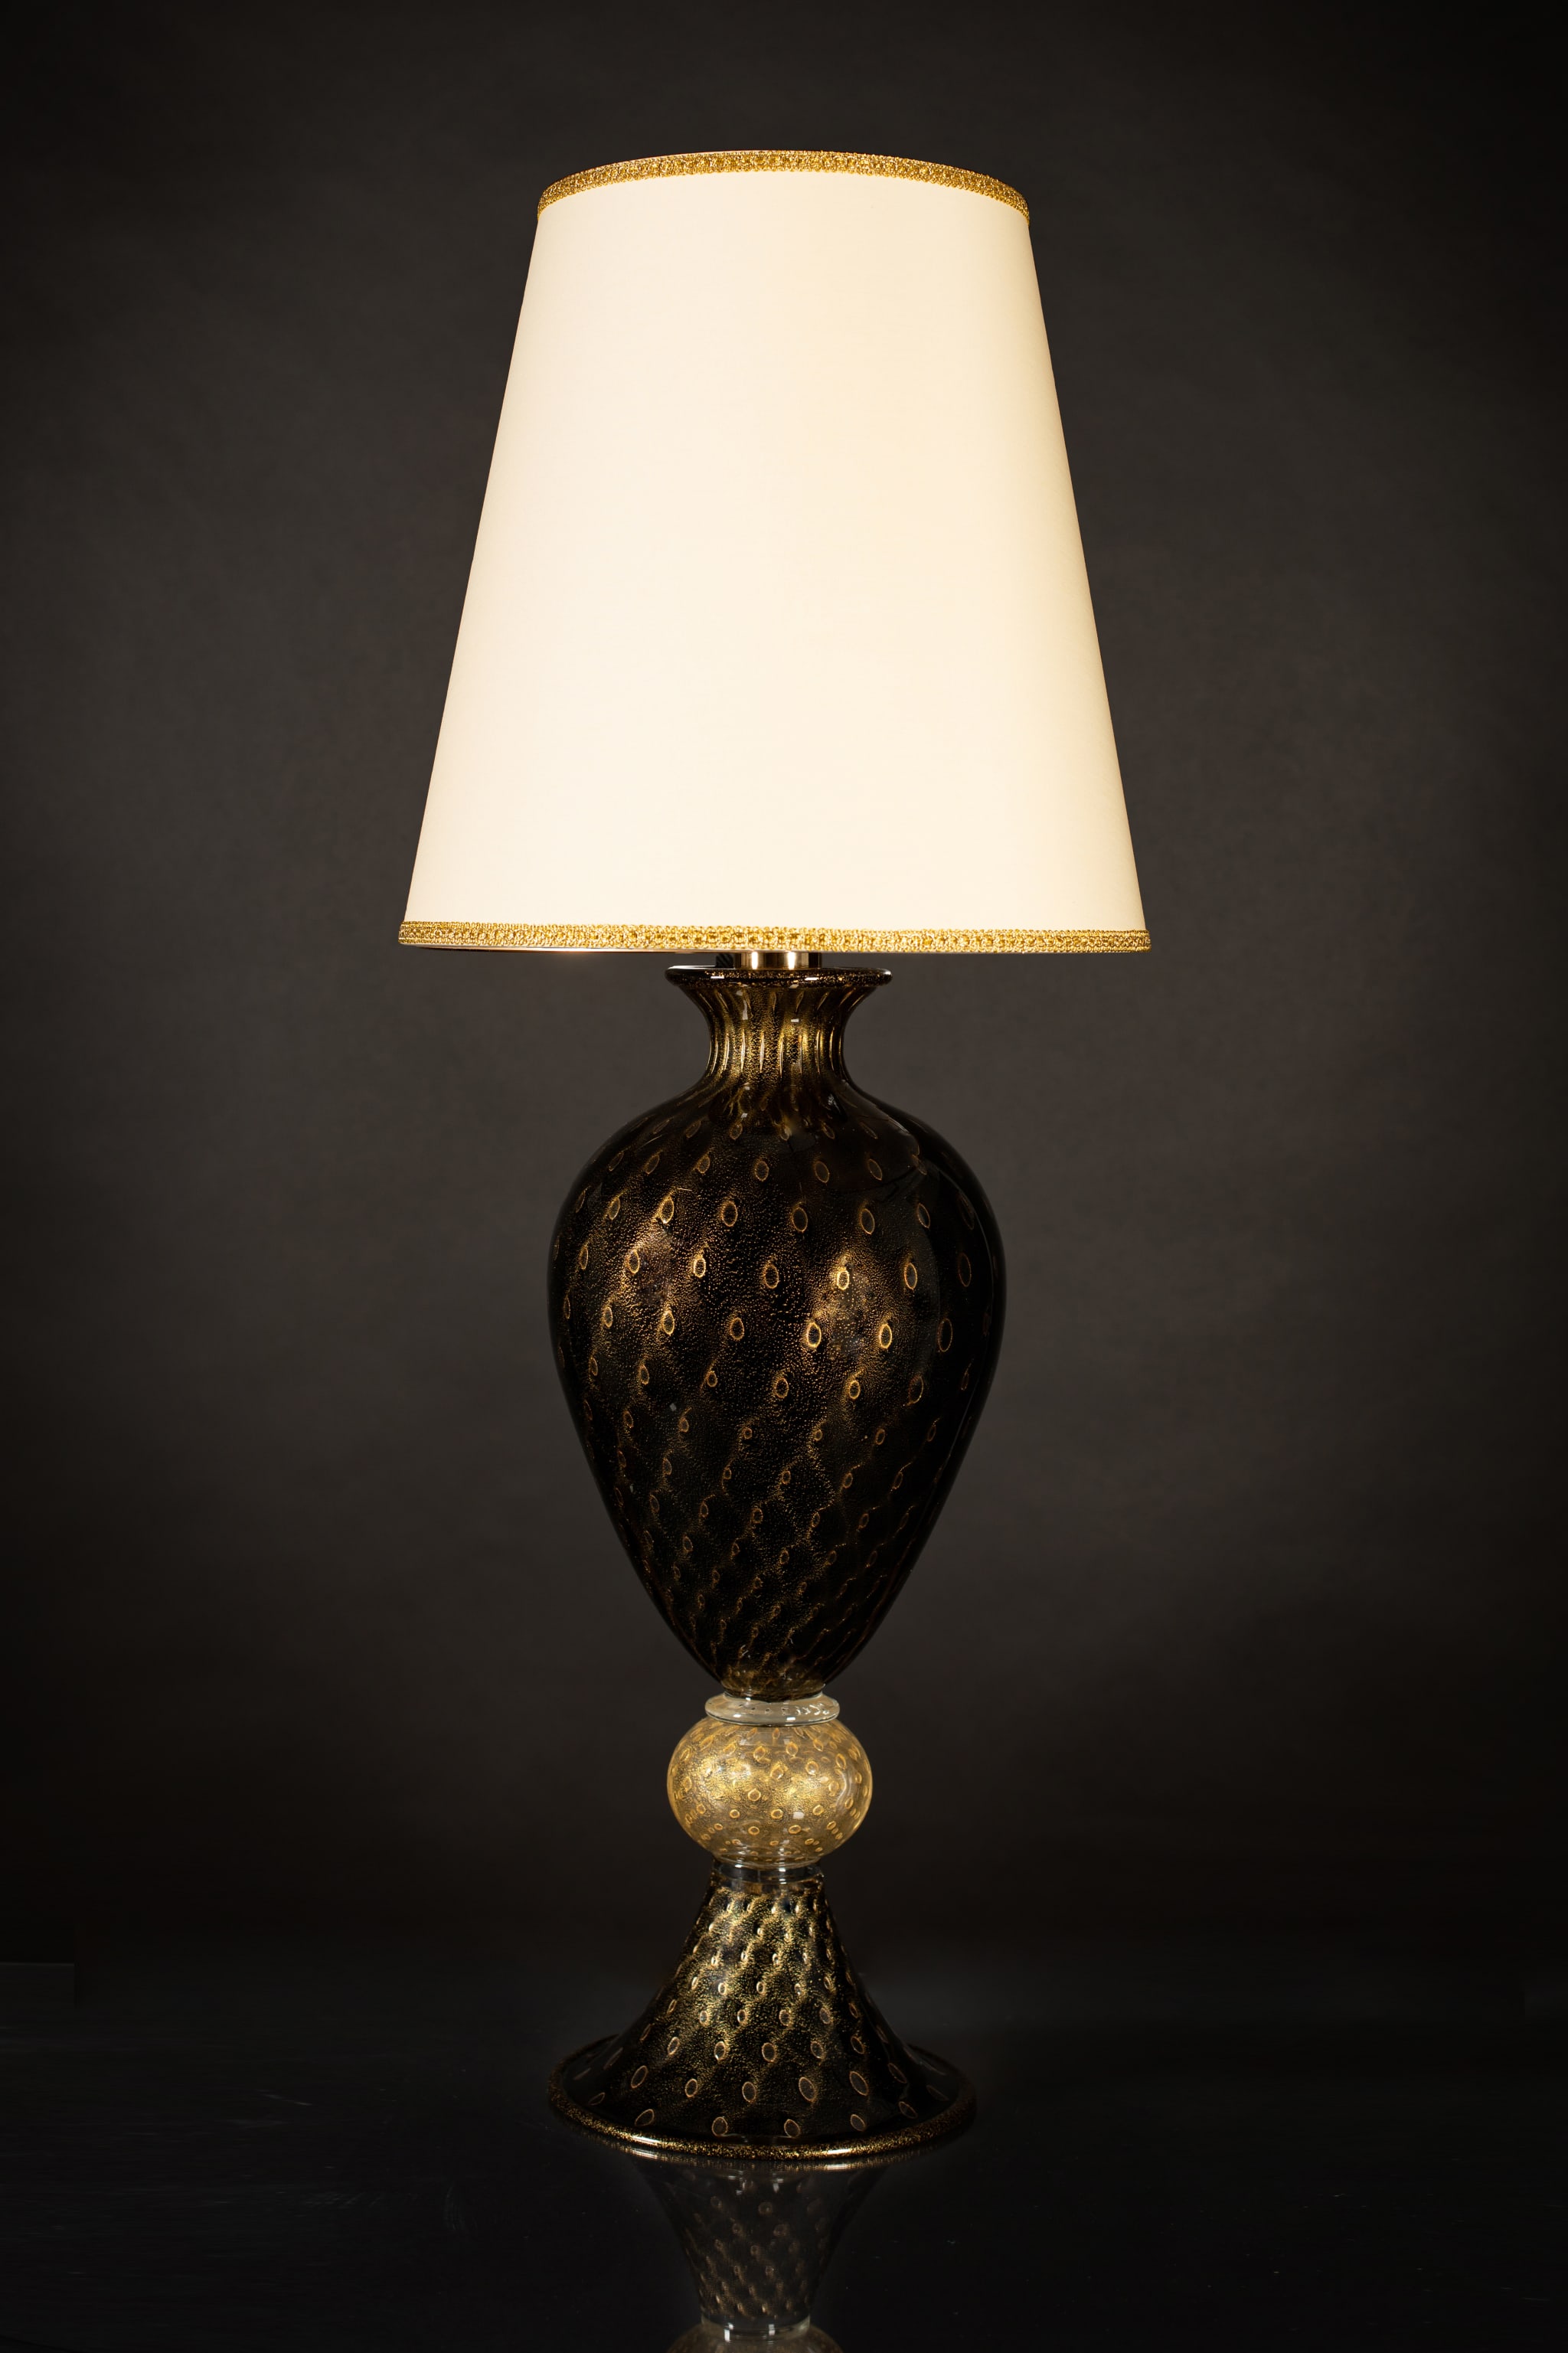 Tall Black and Golden Table Lamp #1 - Alternative view 1